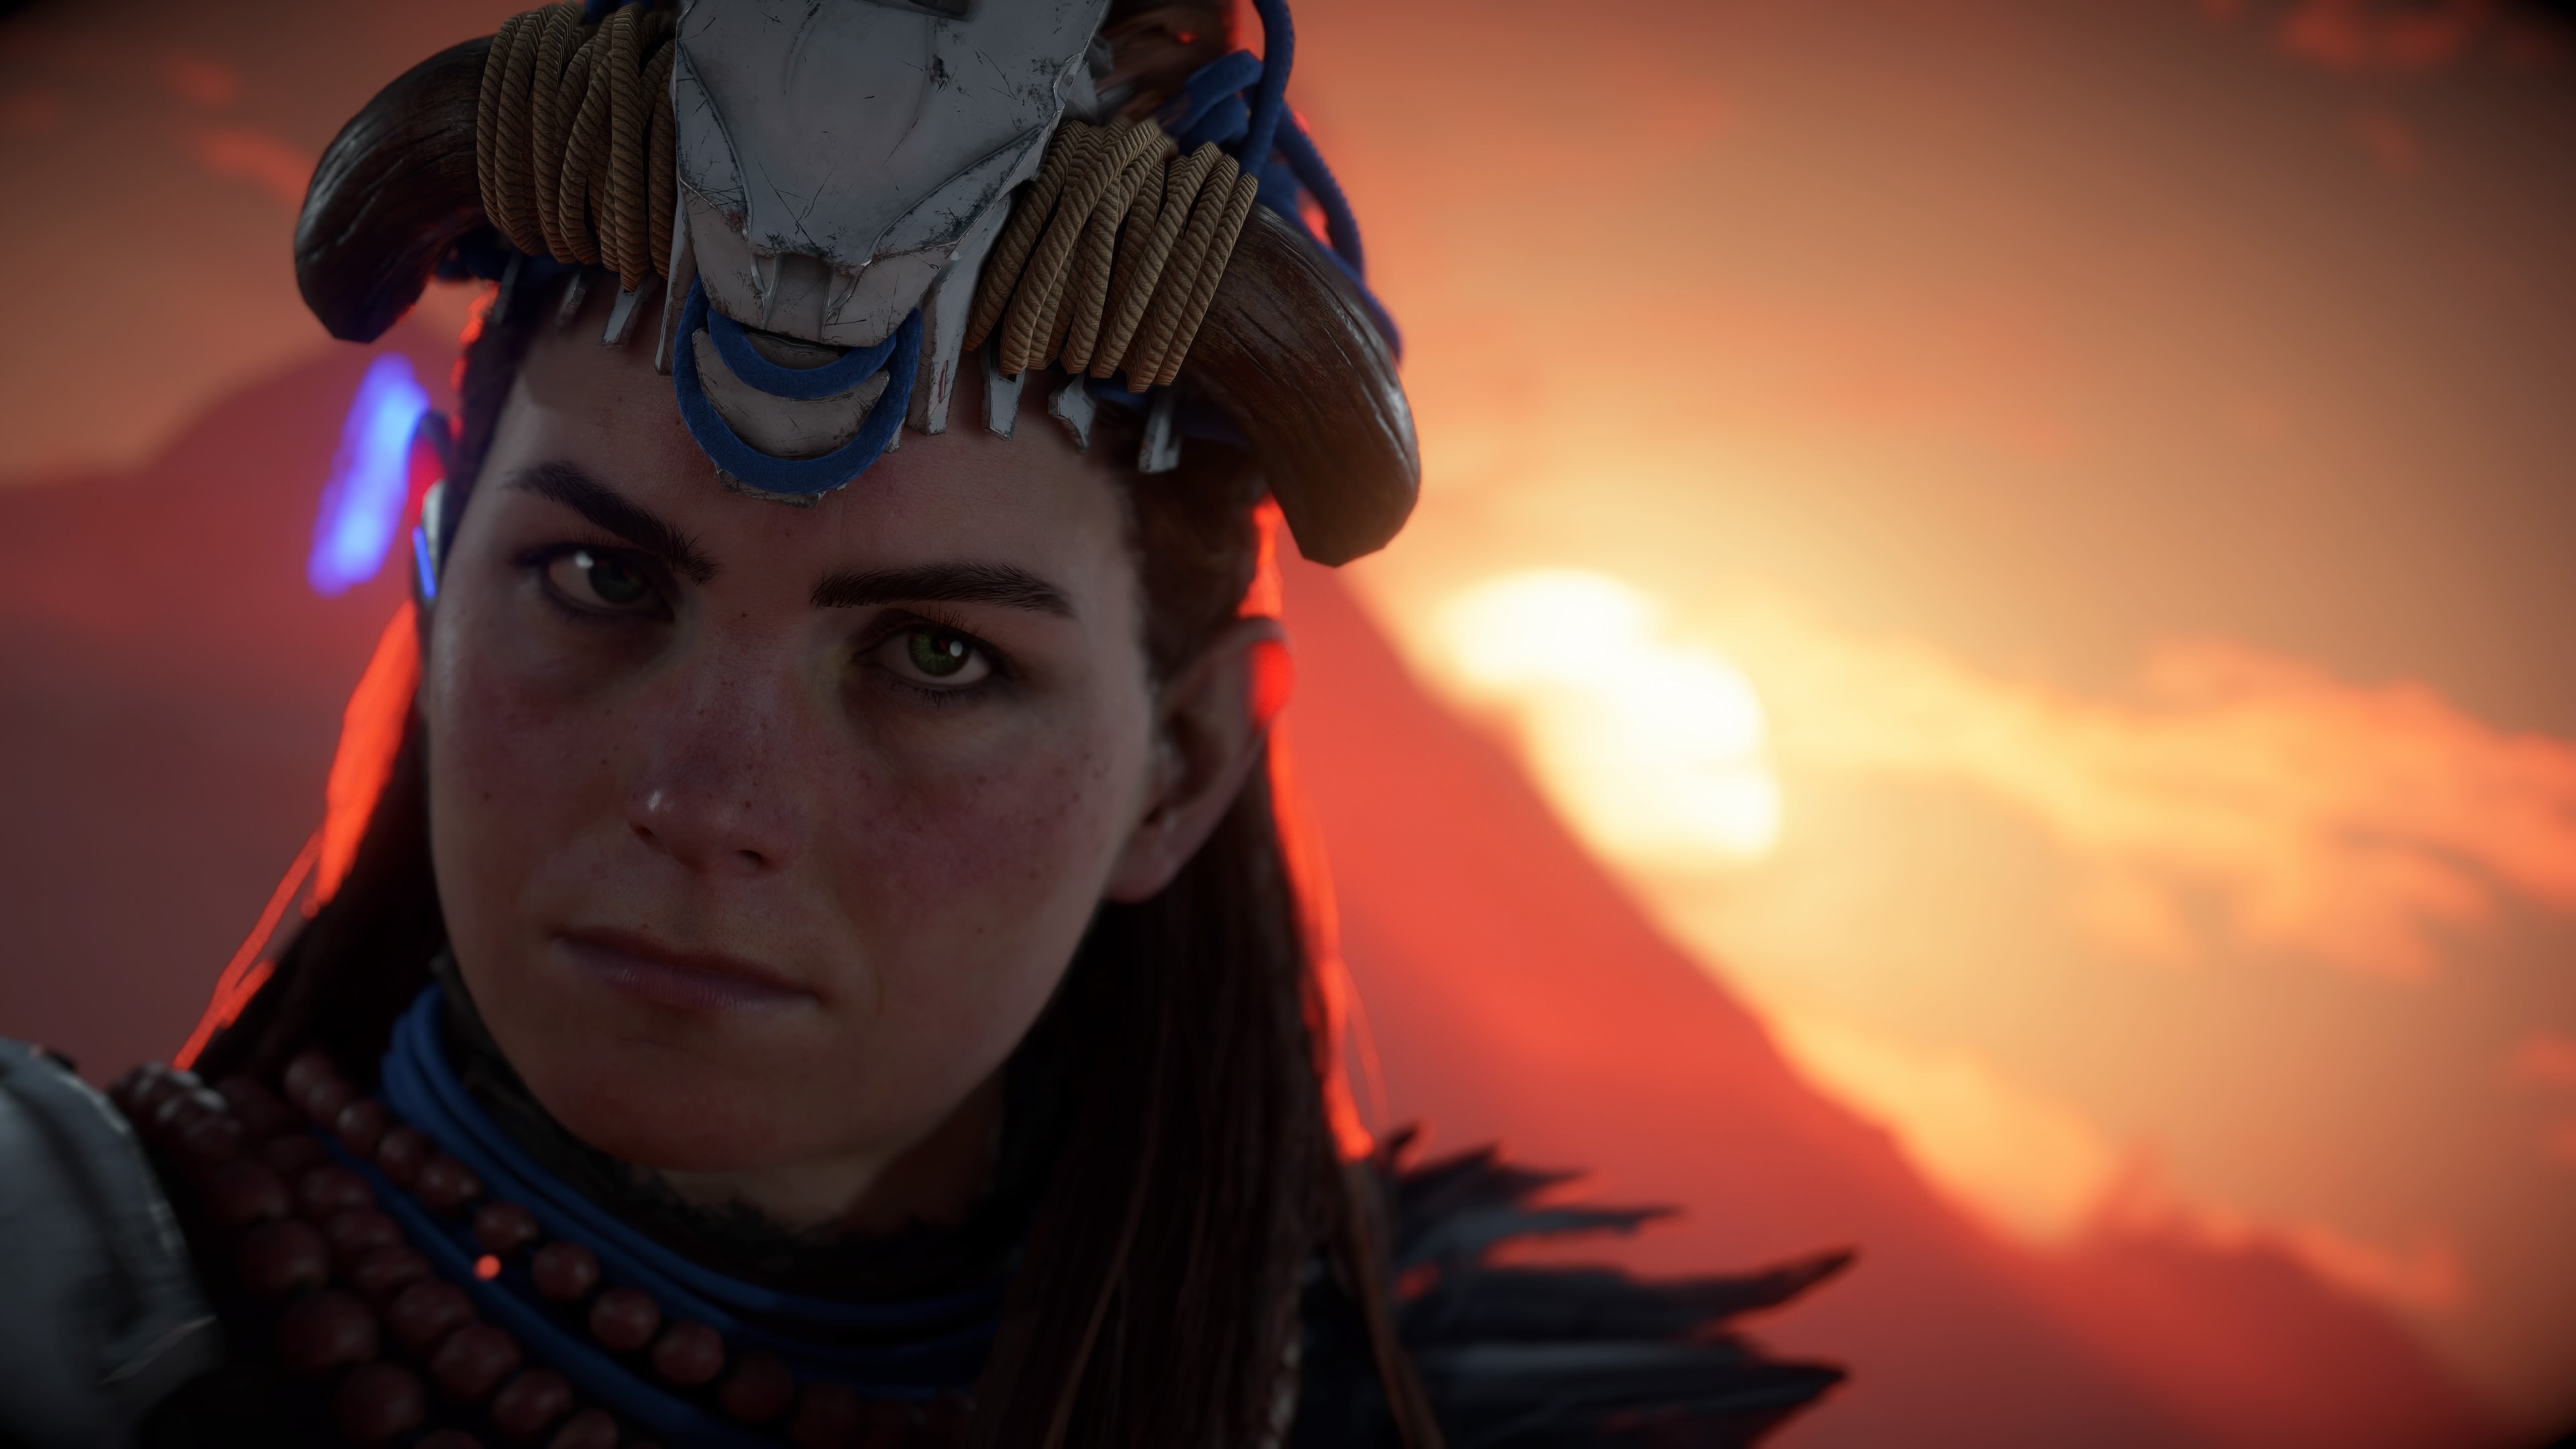 General 3840x2160 Aloy Horizon Forbidden West video games sunset portrait face orange clouds guerrilla games video game characters